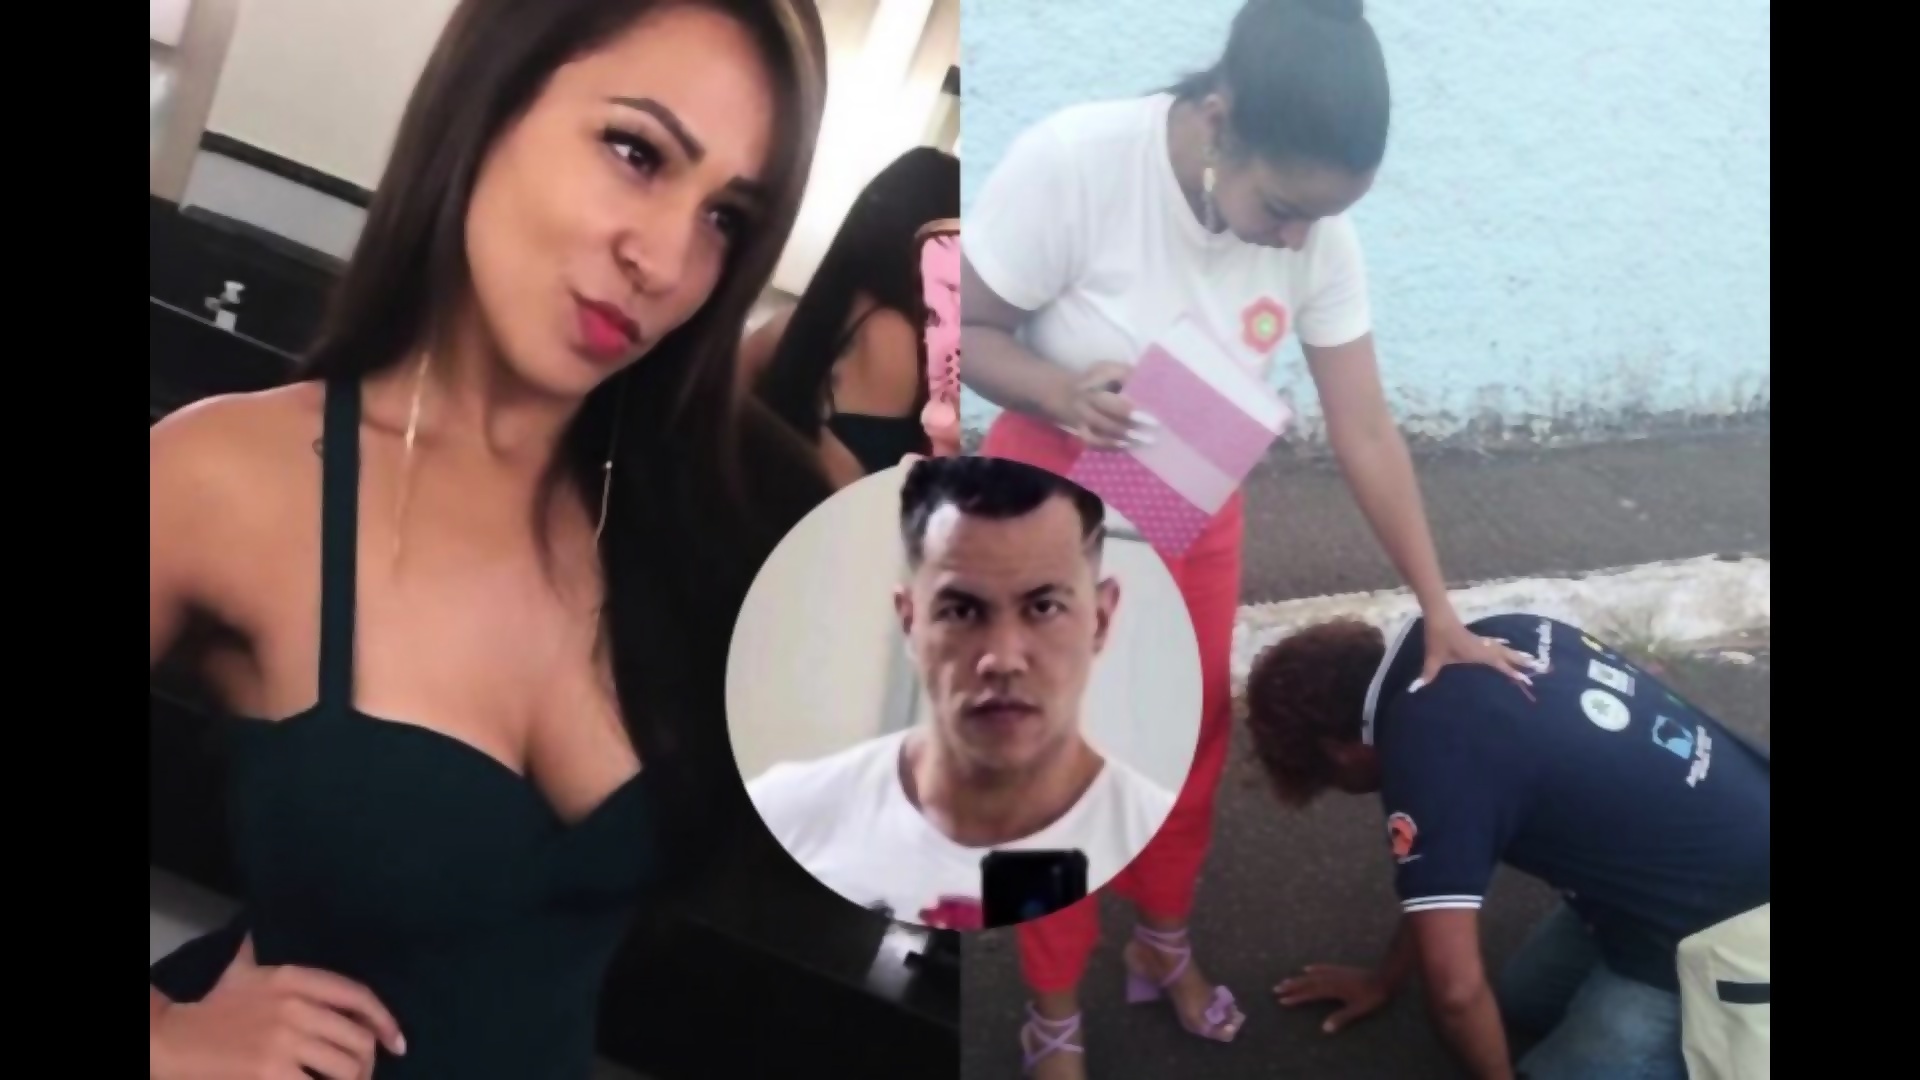 CONTROVERSIAL VIDEO ) Hot Wife Sandrinha Mineirinha Pastor Caught Cheating On Her Personal Husband With A Beggar picture